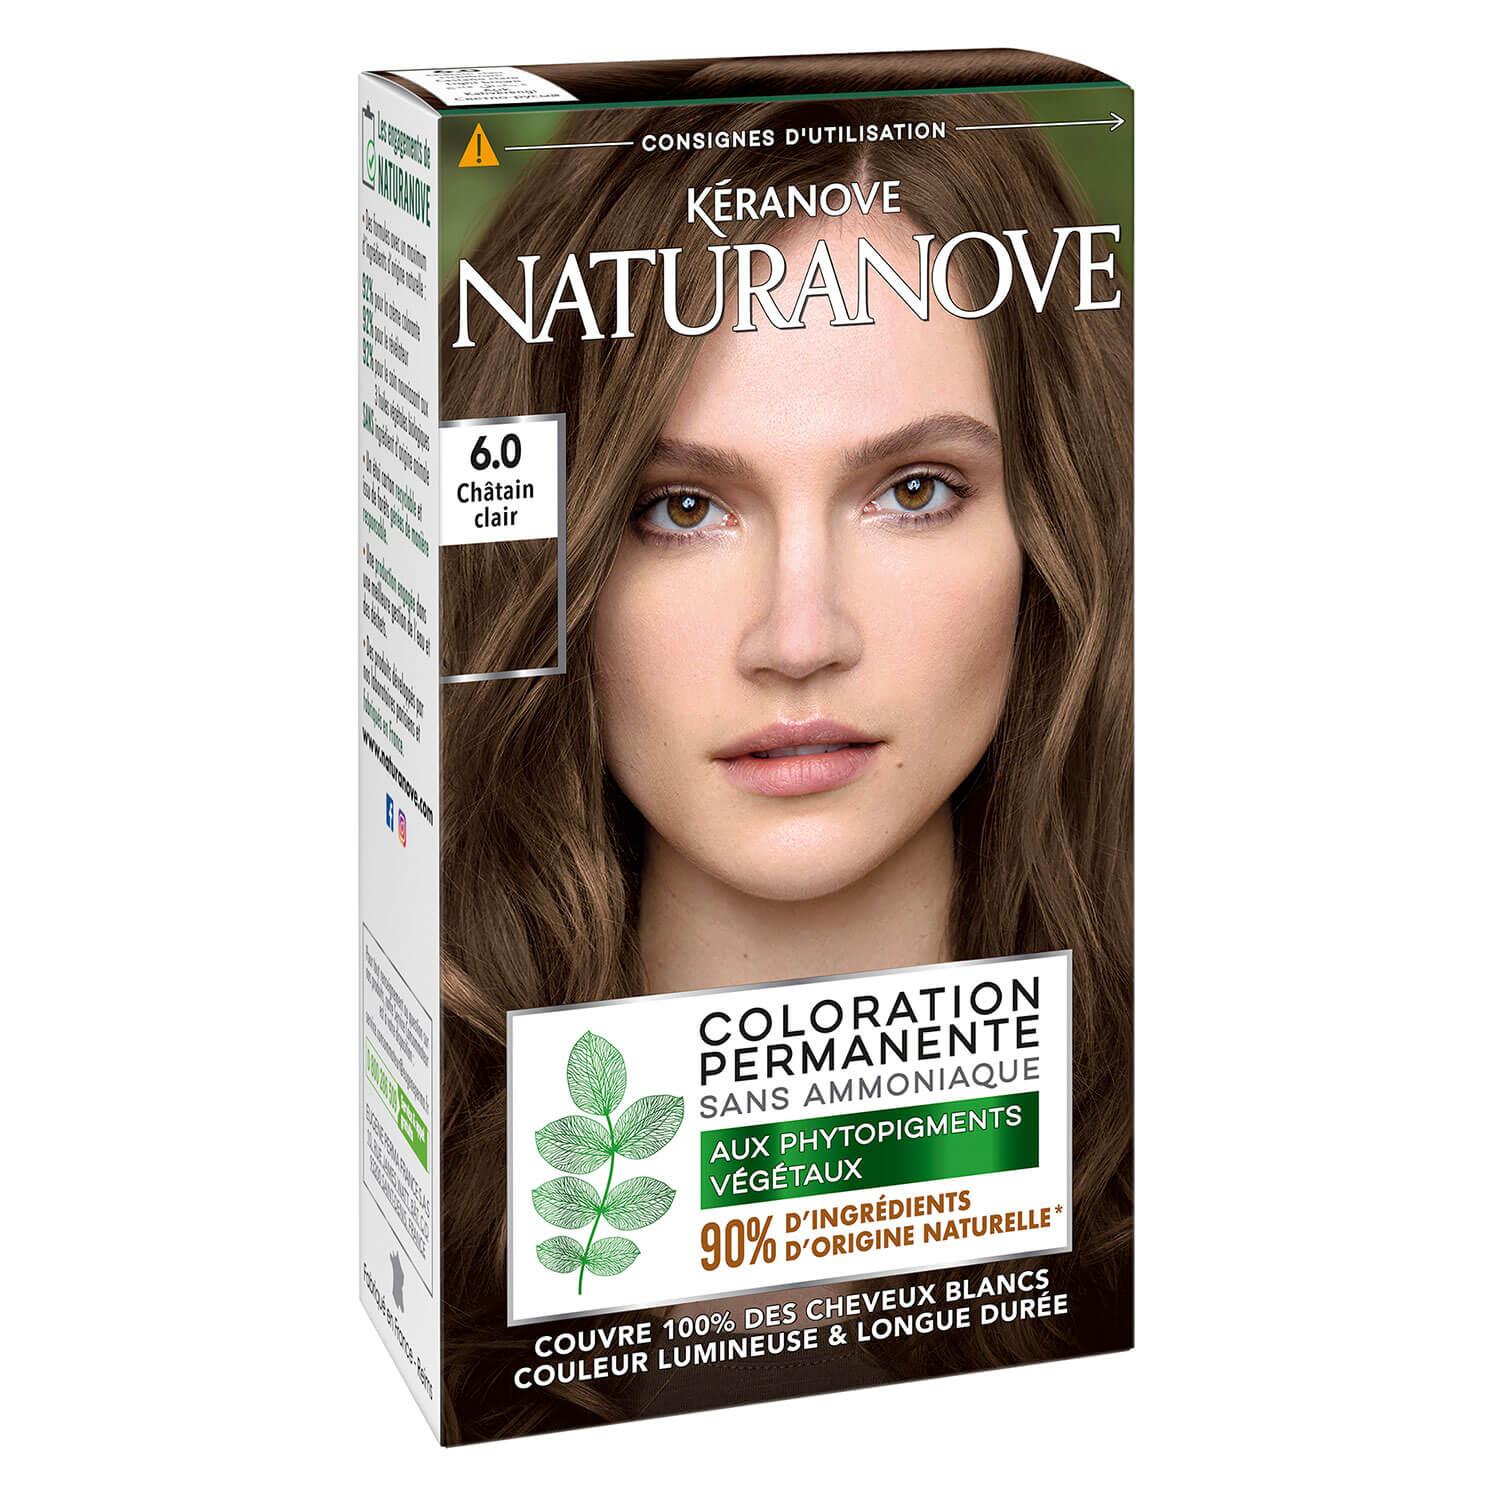 Naturanove - Permanent Hair Color Light Brown 6.0